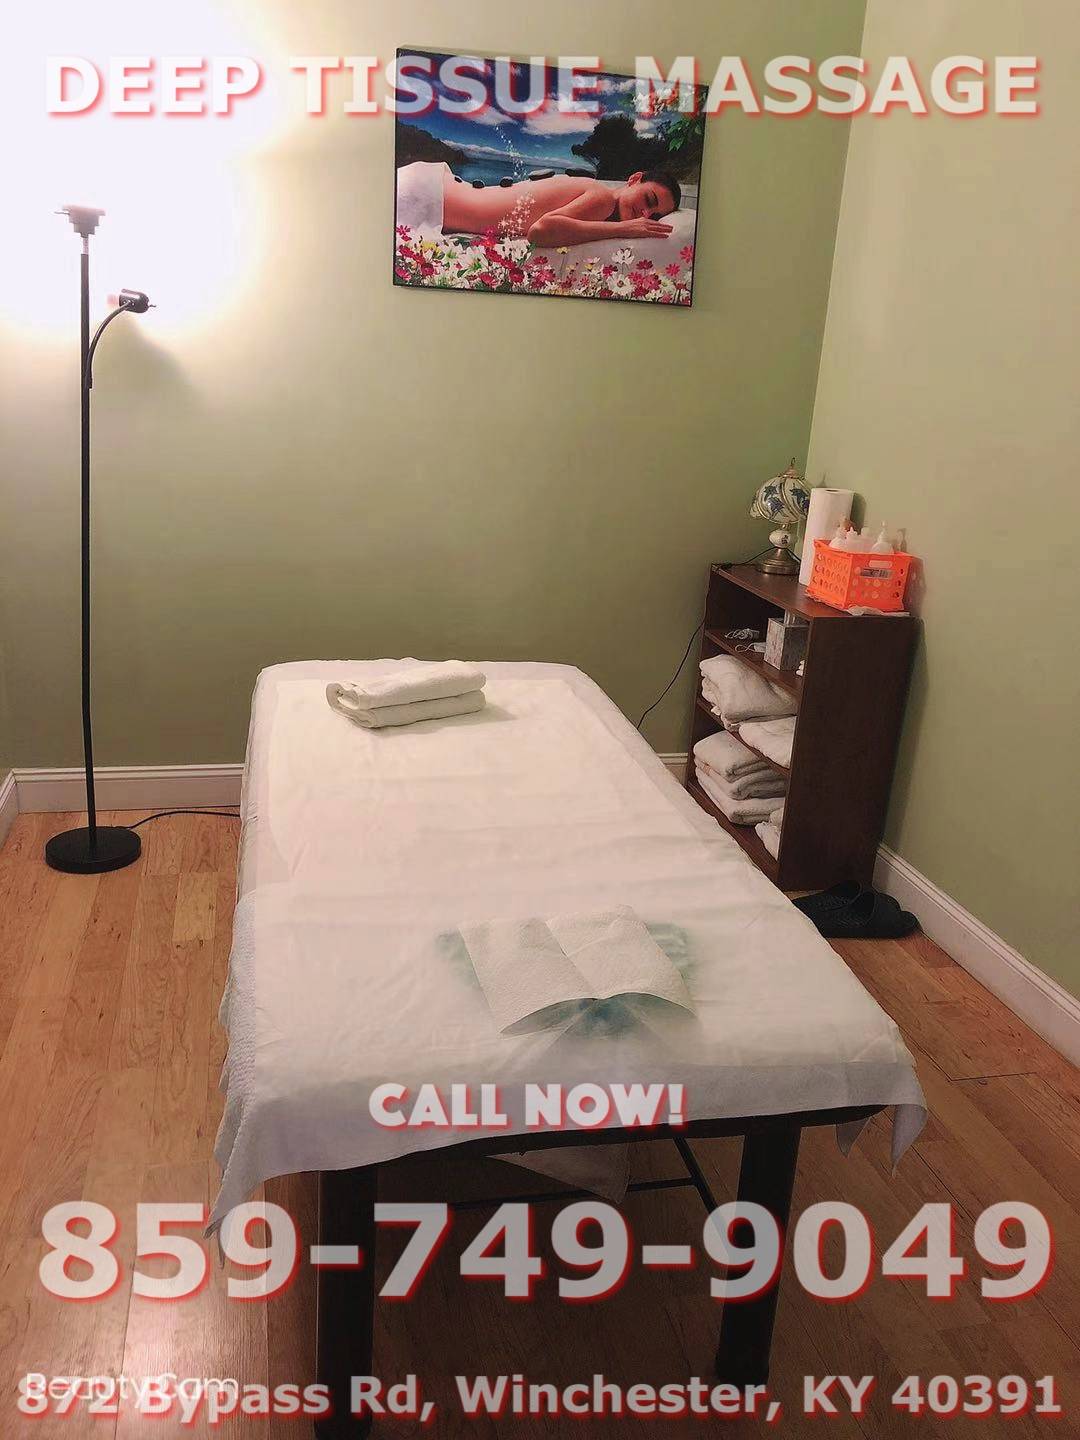 Deep Tissue Massage | 872 Bypass Rd, Winchester, KY 40391, United States | Phone: (859) 749-9049